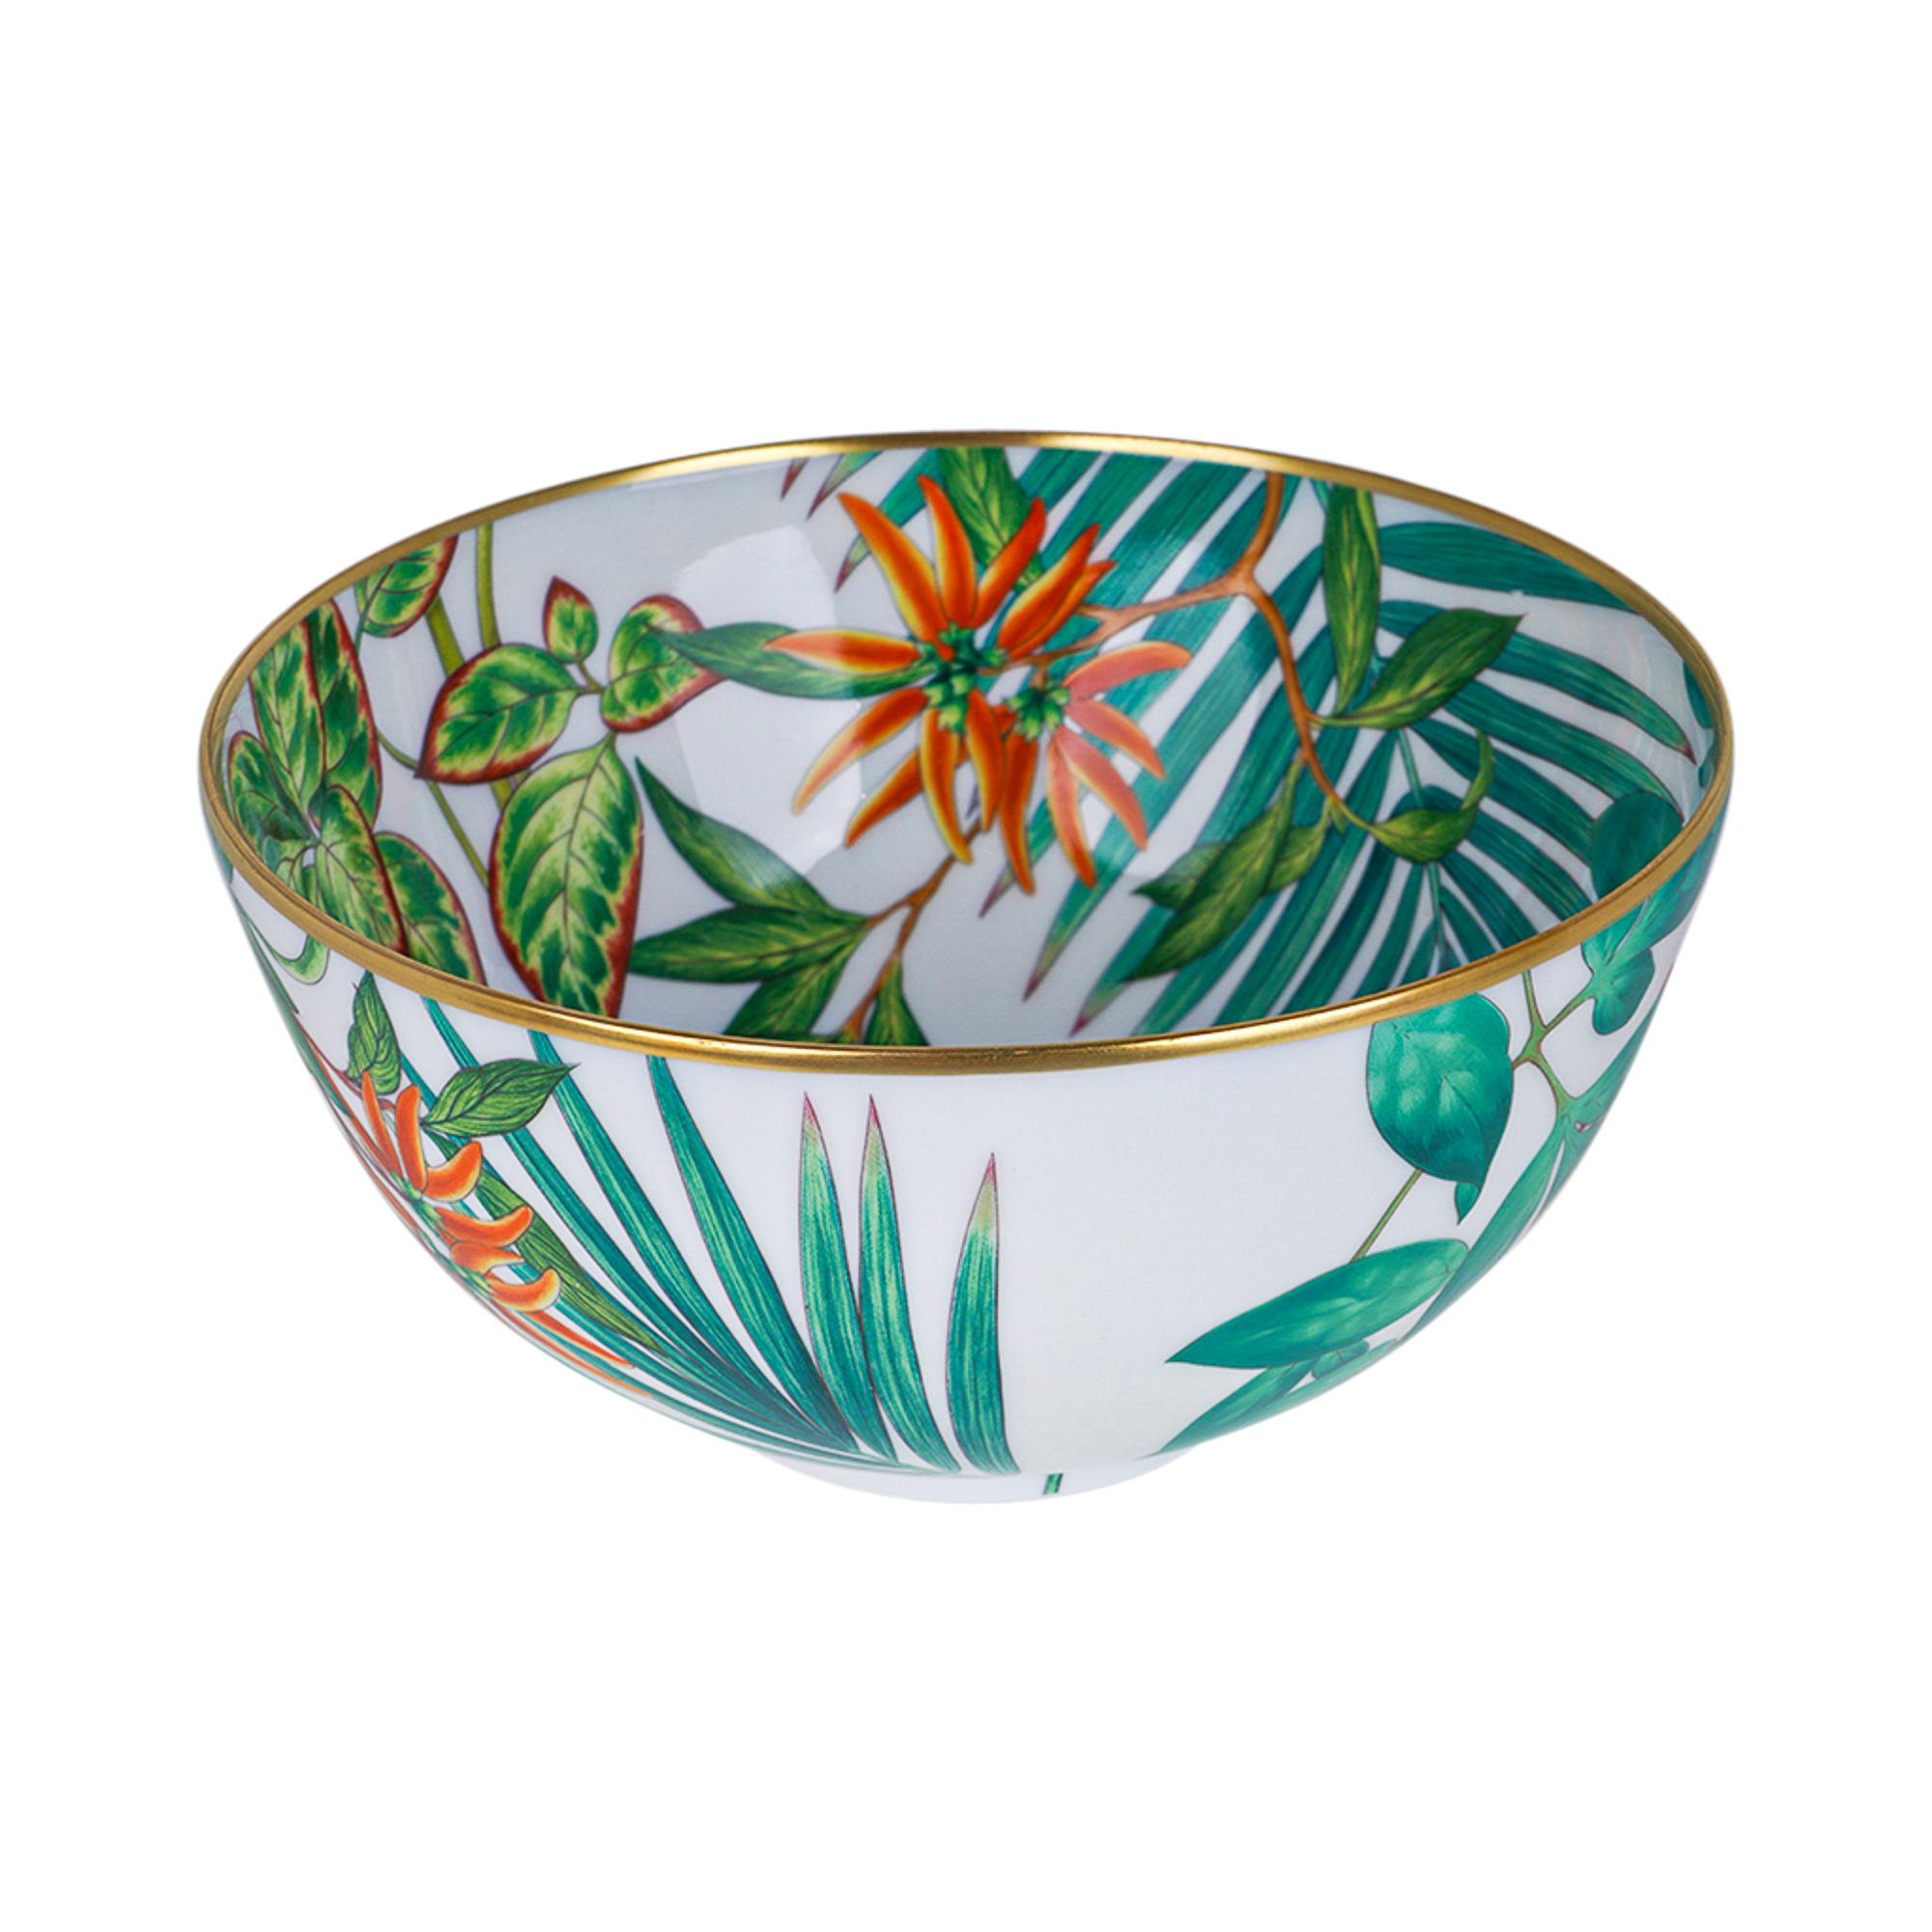 Mightychic offers an  Hermes Large Salad Bowl featured in the classic Hermes Passifolia pattern.
A beautiful hommage to the peace and power of flora.
Decorated using Chromolithography.
Hand-painted 24K gold trim.
Beautiful salad bowl to use with the